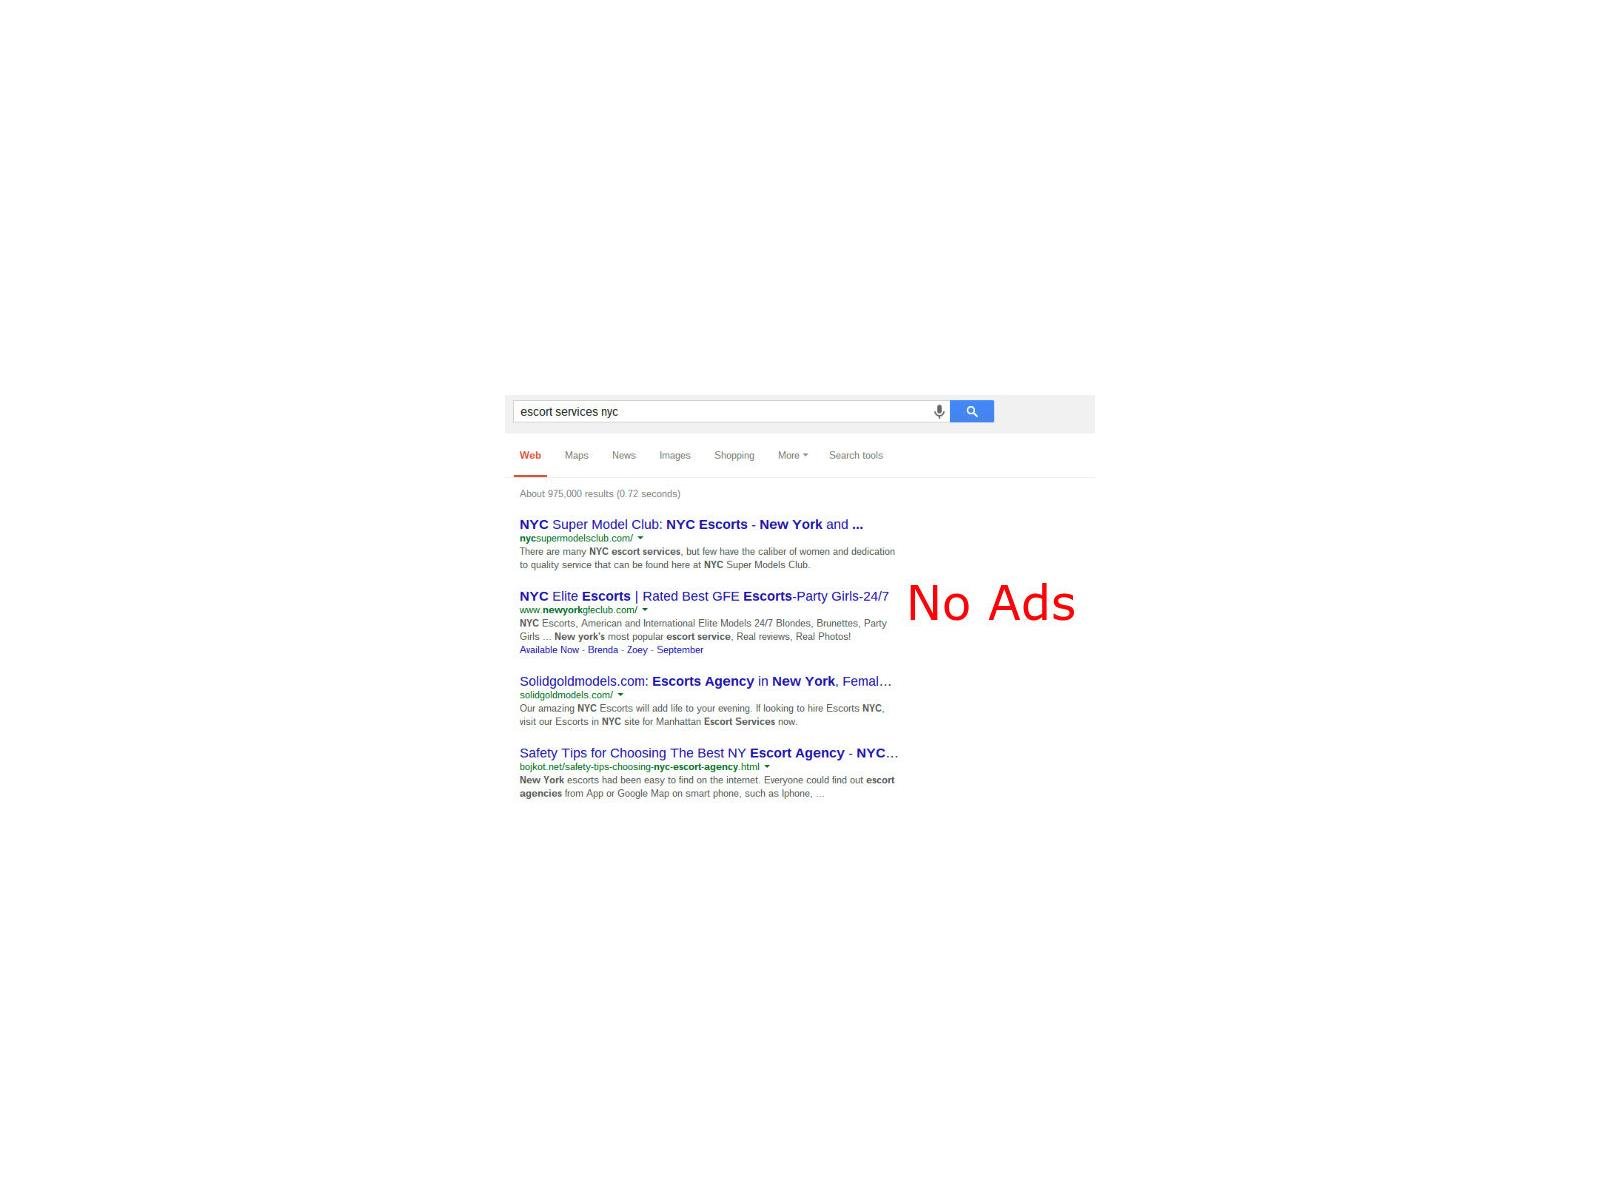 Black Woman Porn Site Ads - Google Bans Porn Ads From Adwords And Search Results | HotHardware